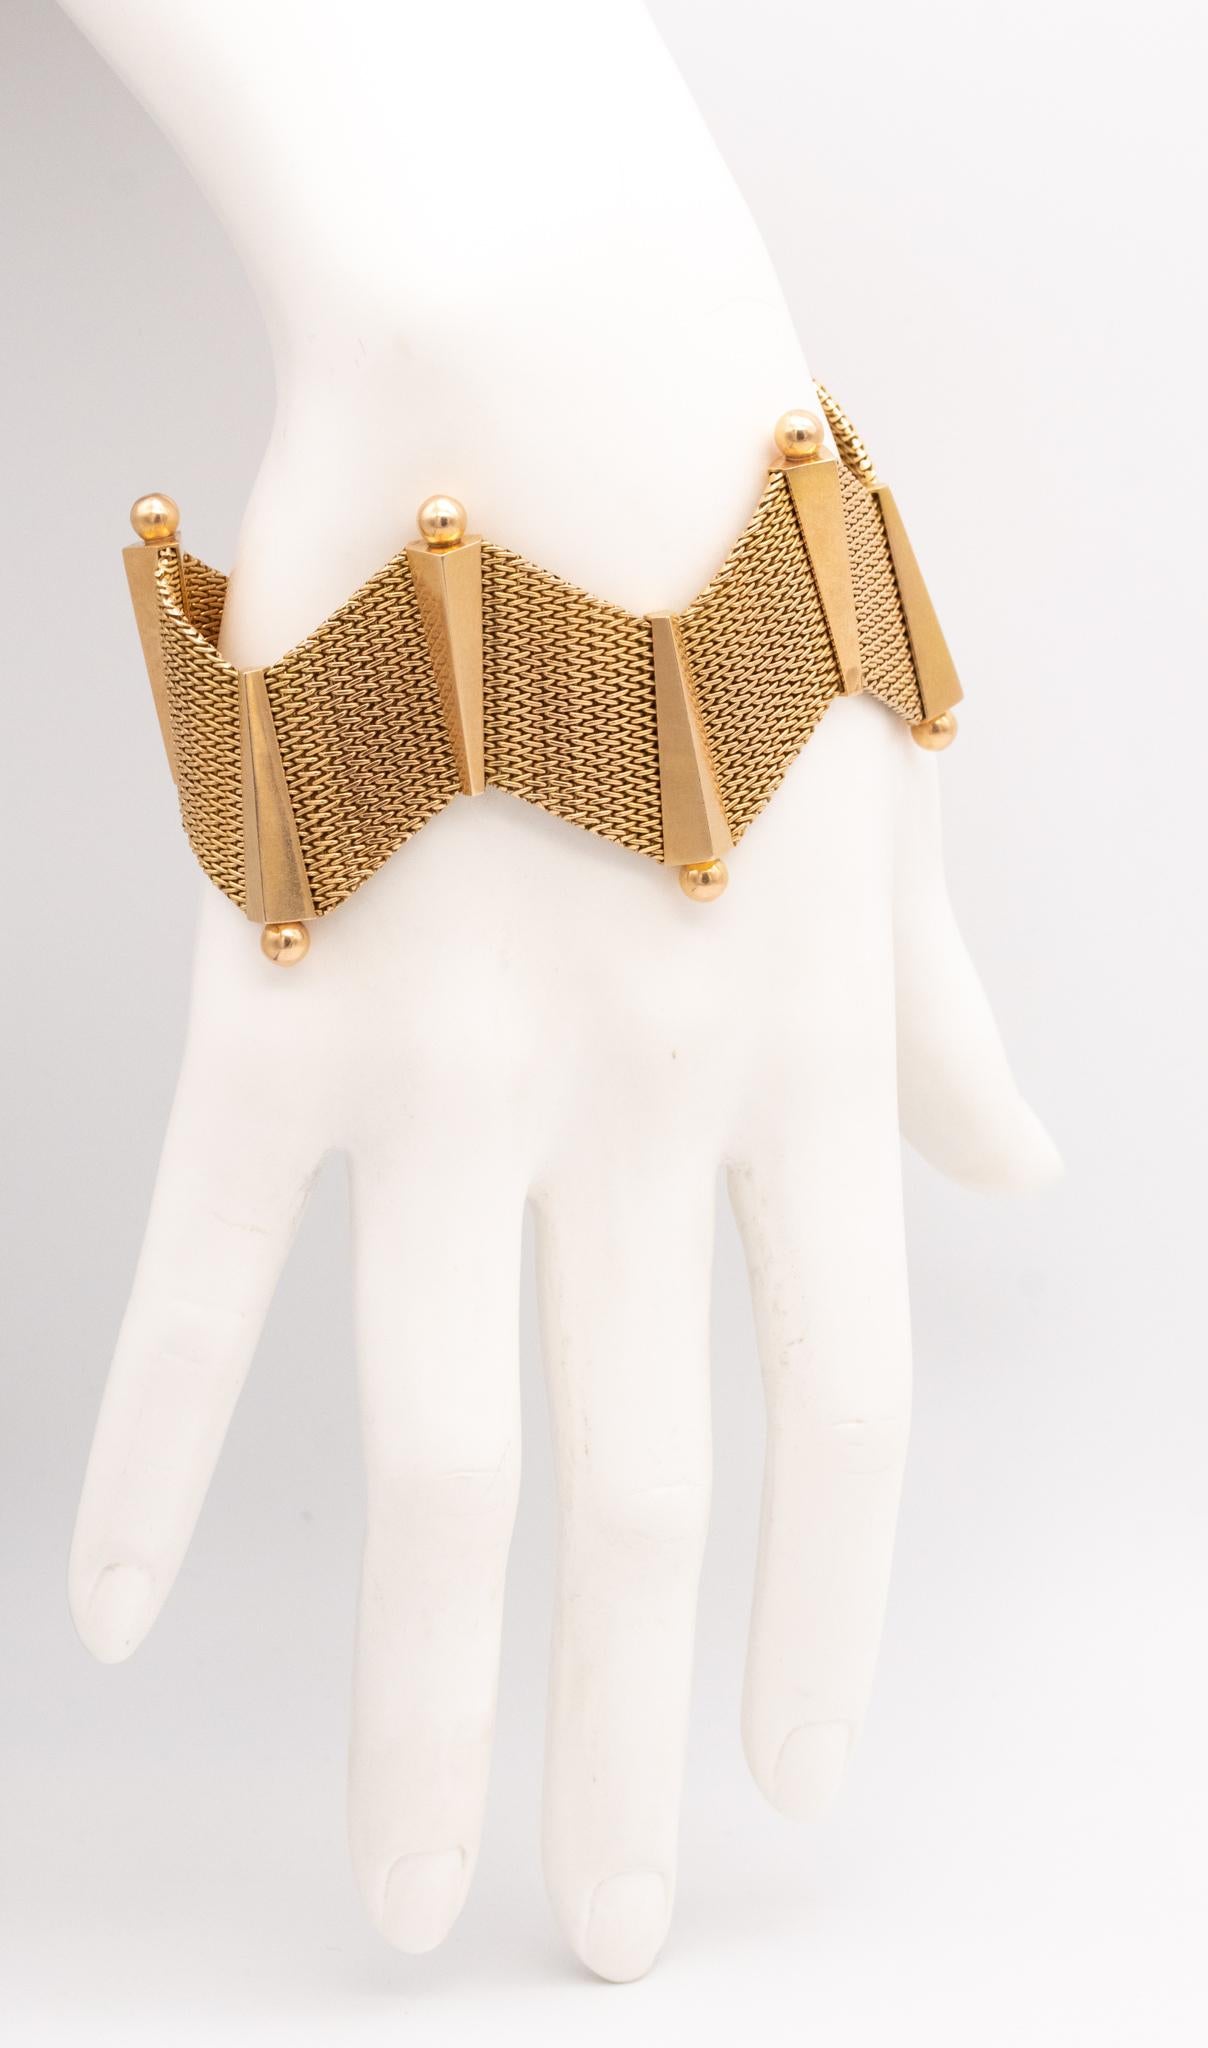 Modernist 1970 European Geometric Retro Zig Zag Bracelet Solid 18Kt Yellow Gold In Excellent Condition For Sale In Miami, FL